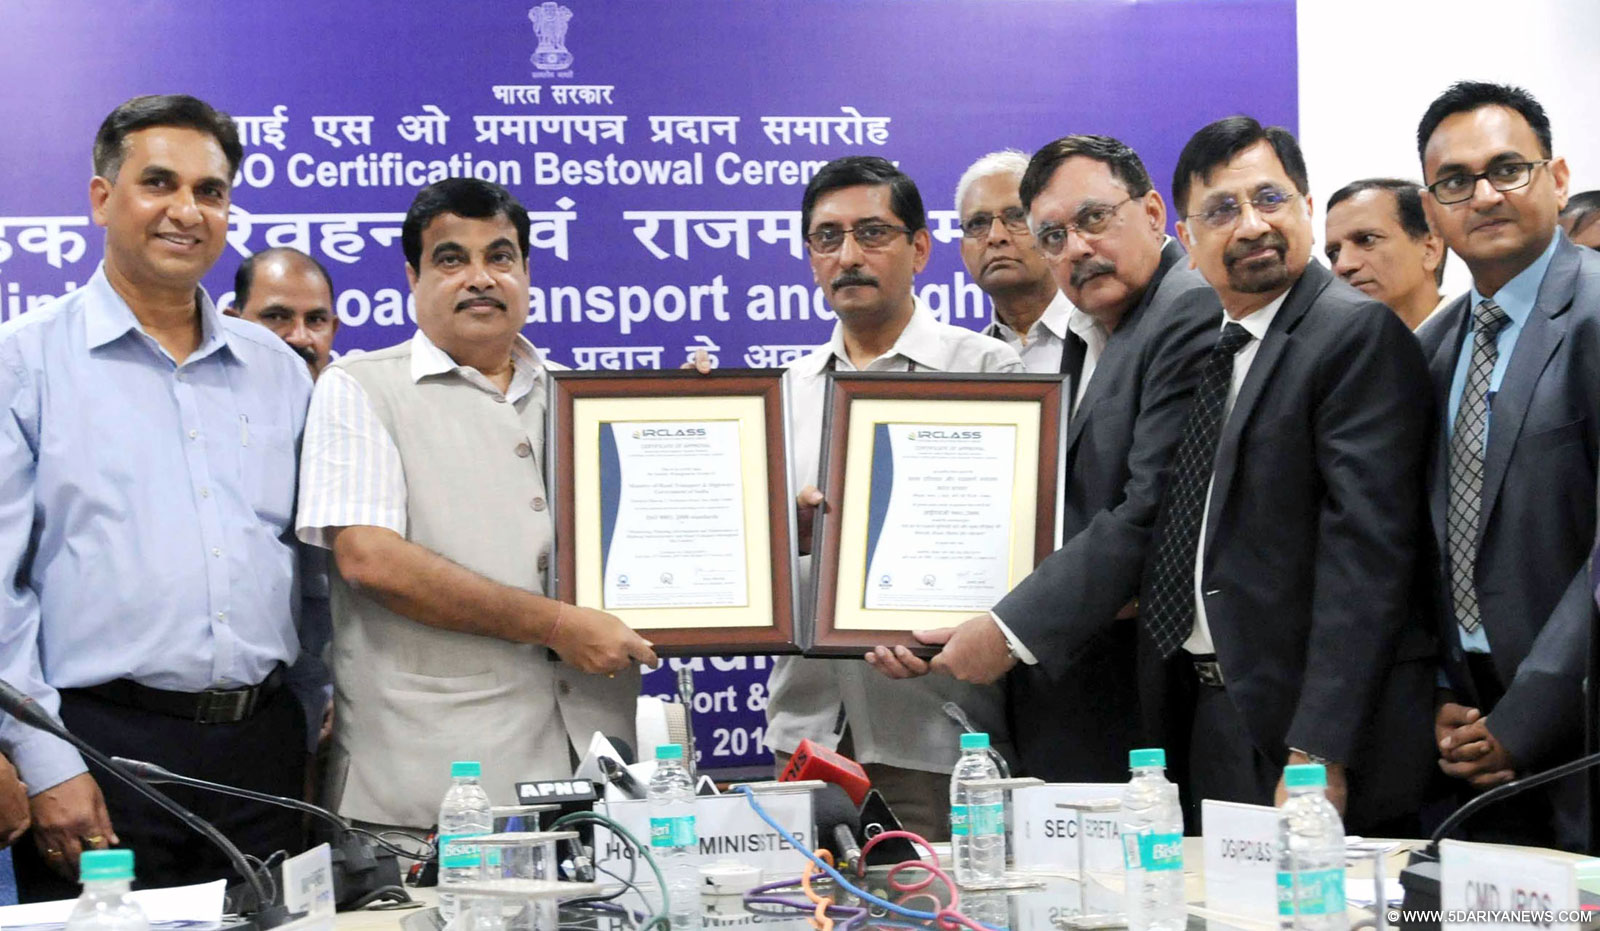 The Union Minister for Road Transport & Highways and Shipping, Shri Nitin Gadkari being received the ISO 9001: 2008 Certificate, acquired by the Ministry of Road Transport & Highways, at a function, in New Delhi on October 12, 2015. The Secretary, Ministry of Road Transport and Highways, Shri Vijay Chibber and other dignitaries are also seen.